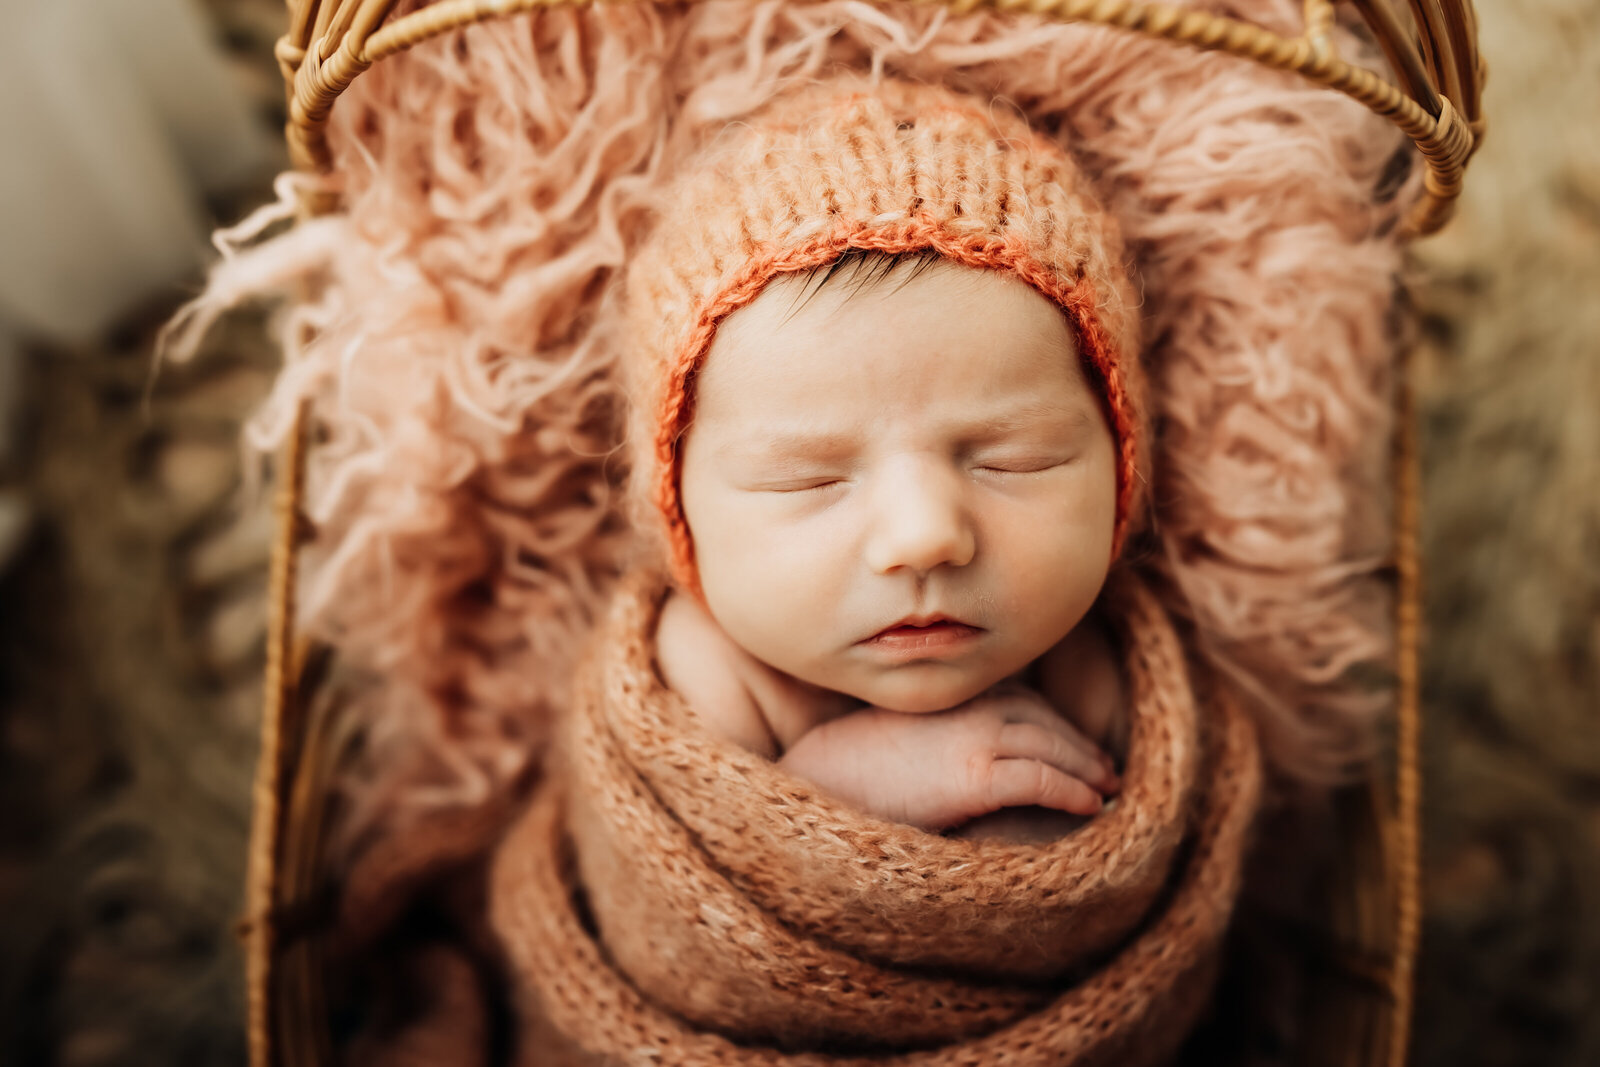 Newborn baby girl in a warm pink bonnet and swaddle